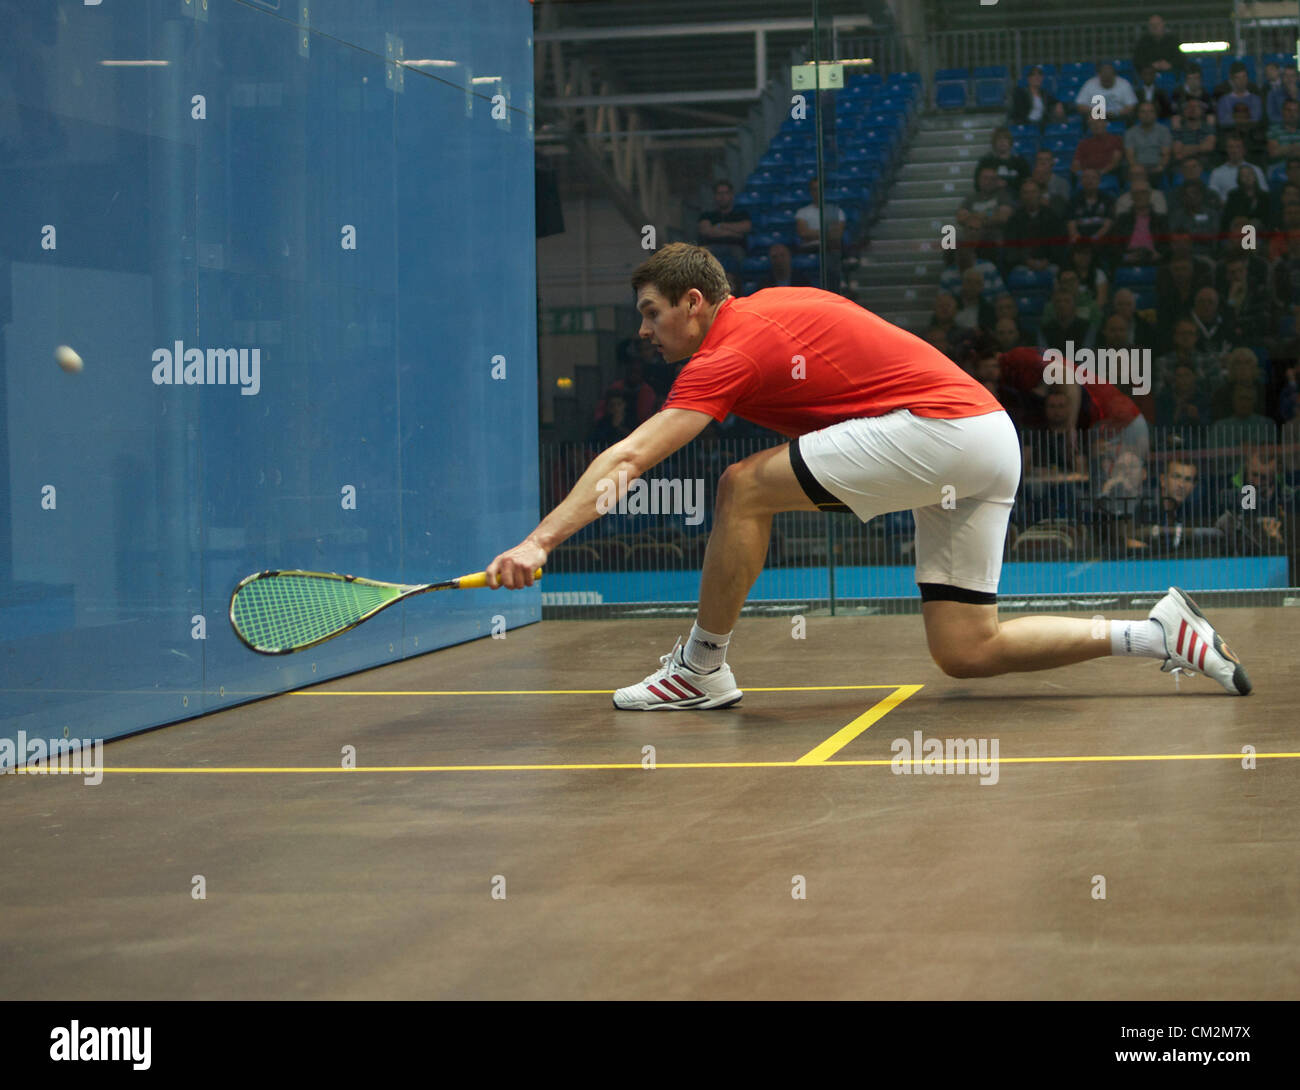 Adrian Waller (England) makes a backhand return during his match with Gregory Gaultier (France). Gaultier won the first round match 11-6.11-7.11-4 in the British Grand Prix at Sportcity, Manchester, UK 21-09-2012 Stock Photo